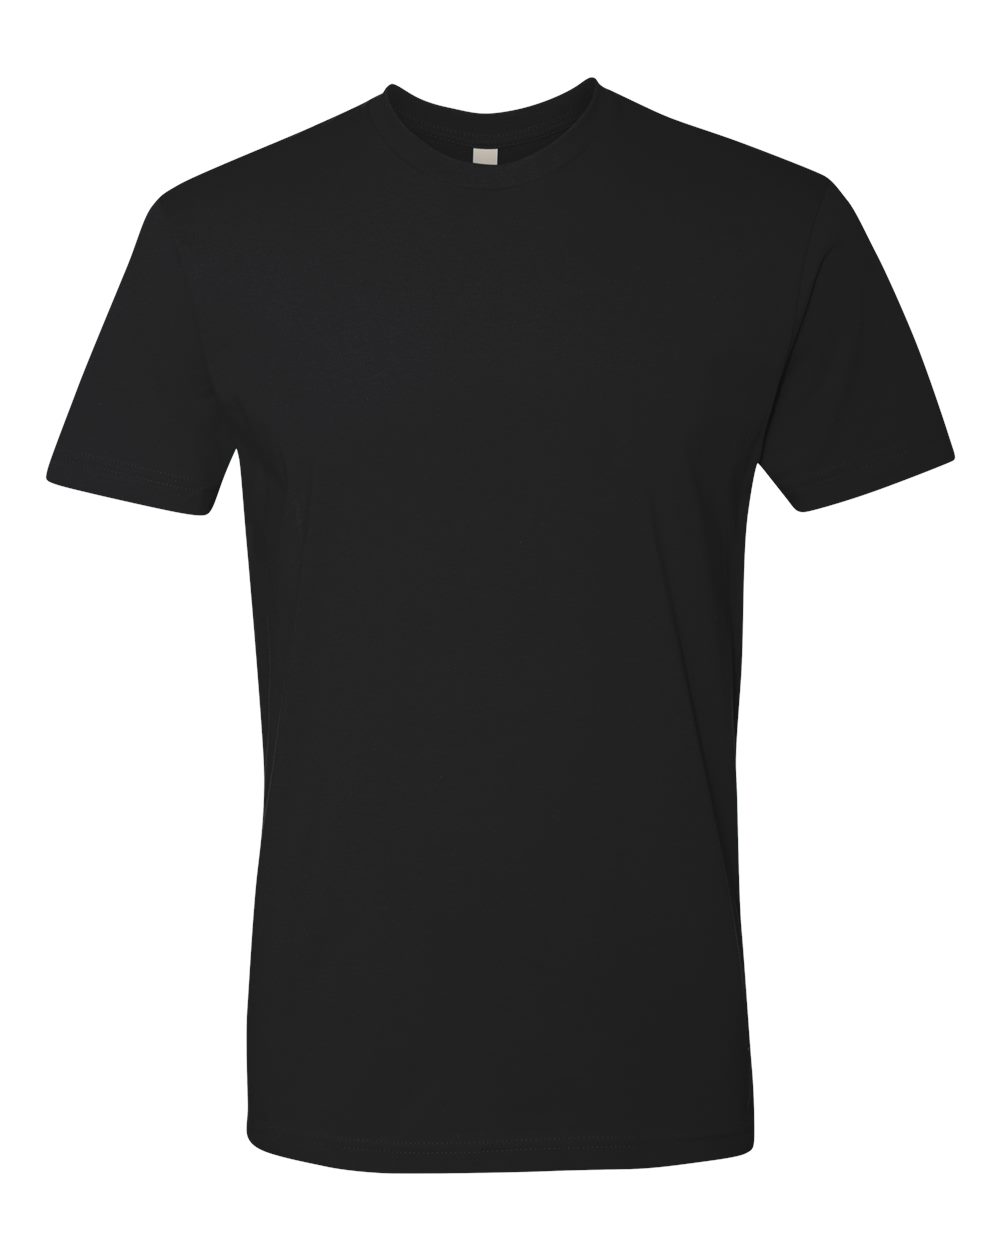 dry fit tee shirts